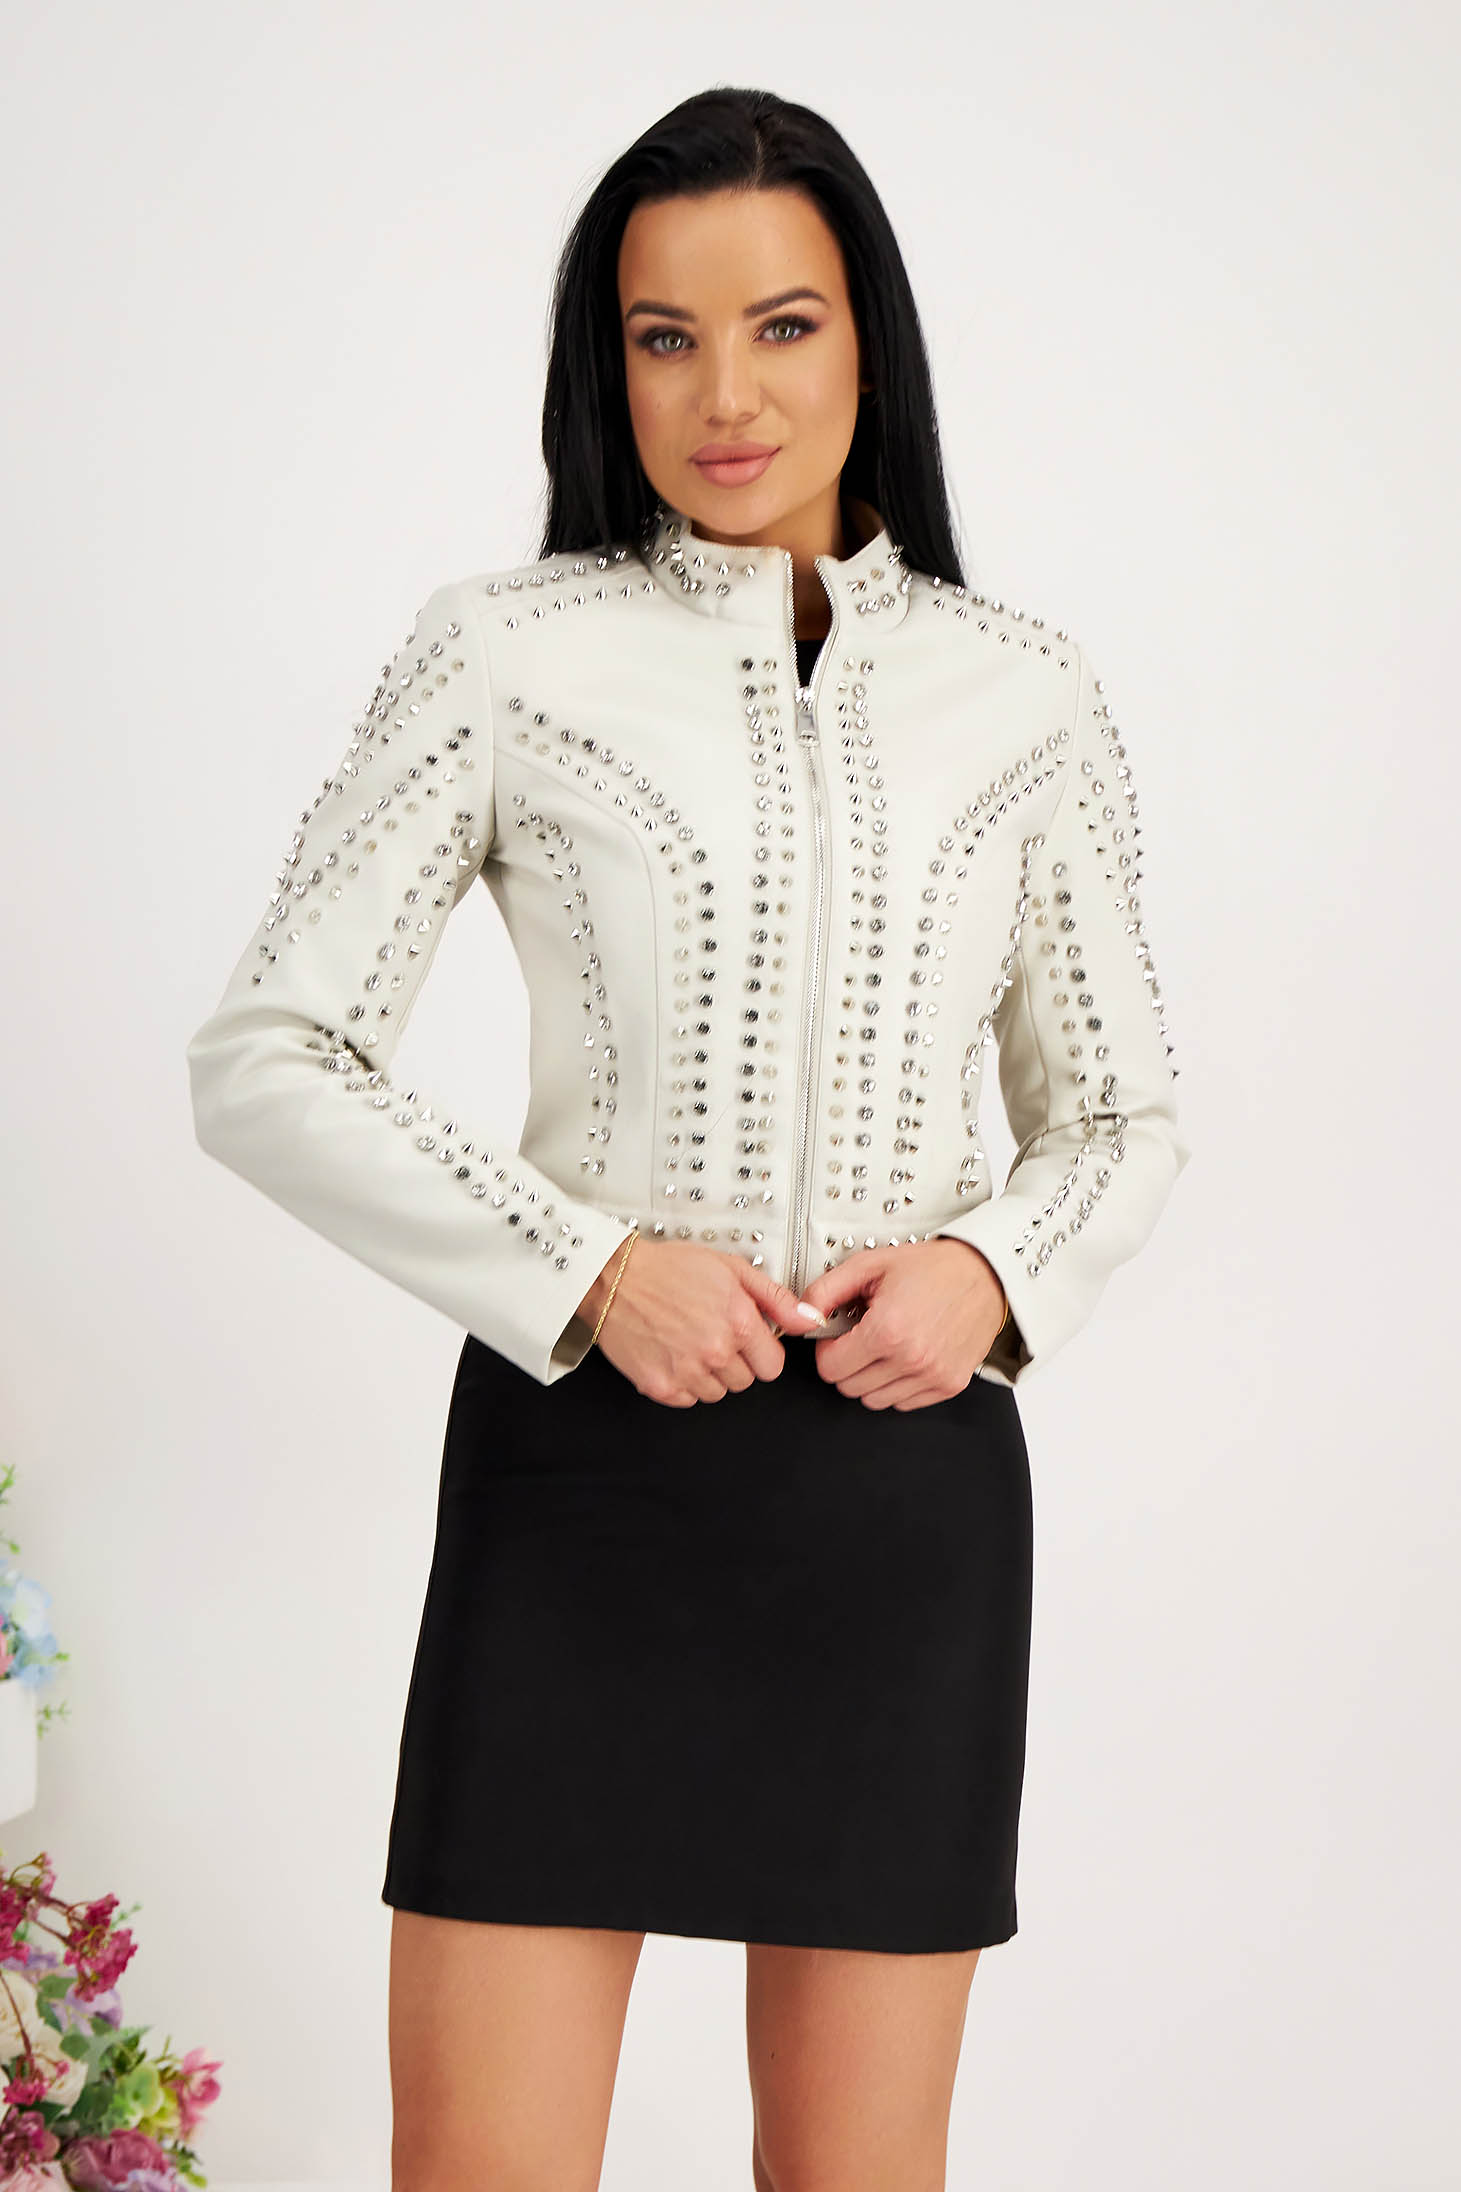 Ivory jacket from ecological leather straight with metallic spikes